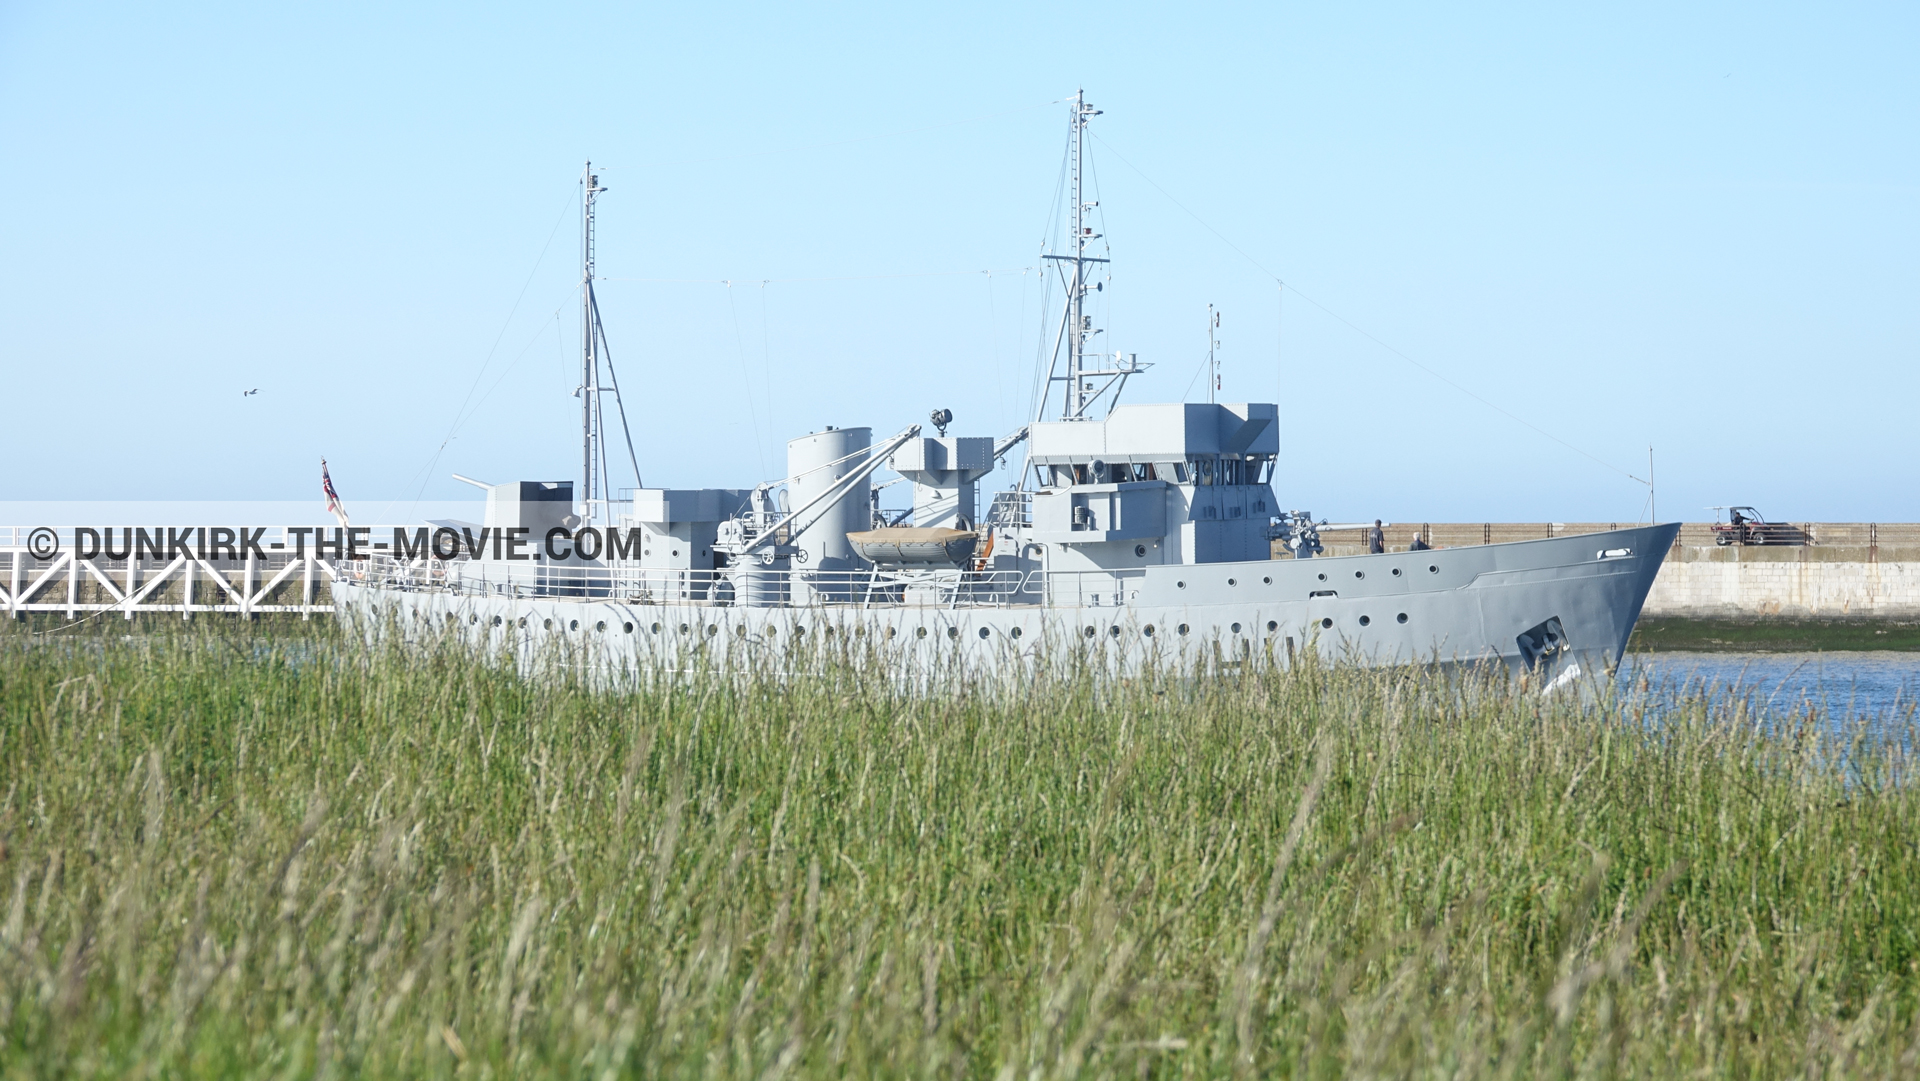 Picture with H11 - MLV Castor, EST pier,  from behind the scene of the Dunkirk movie by Nolan